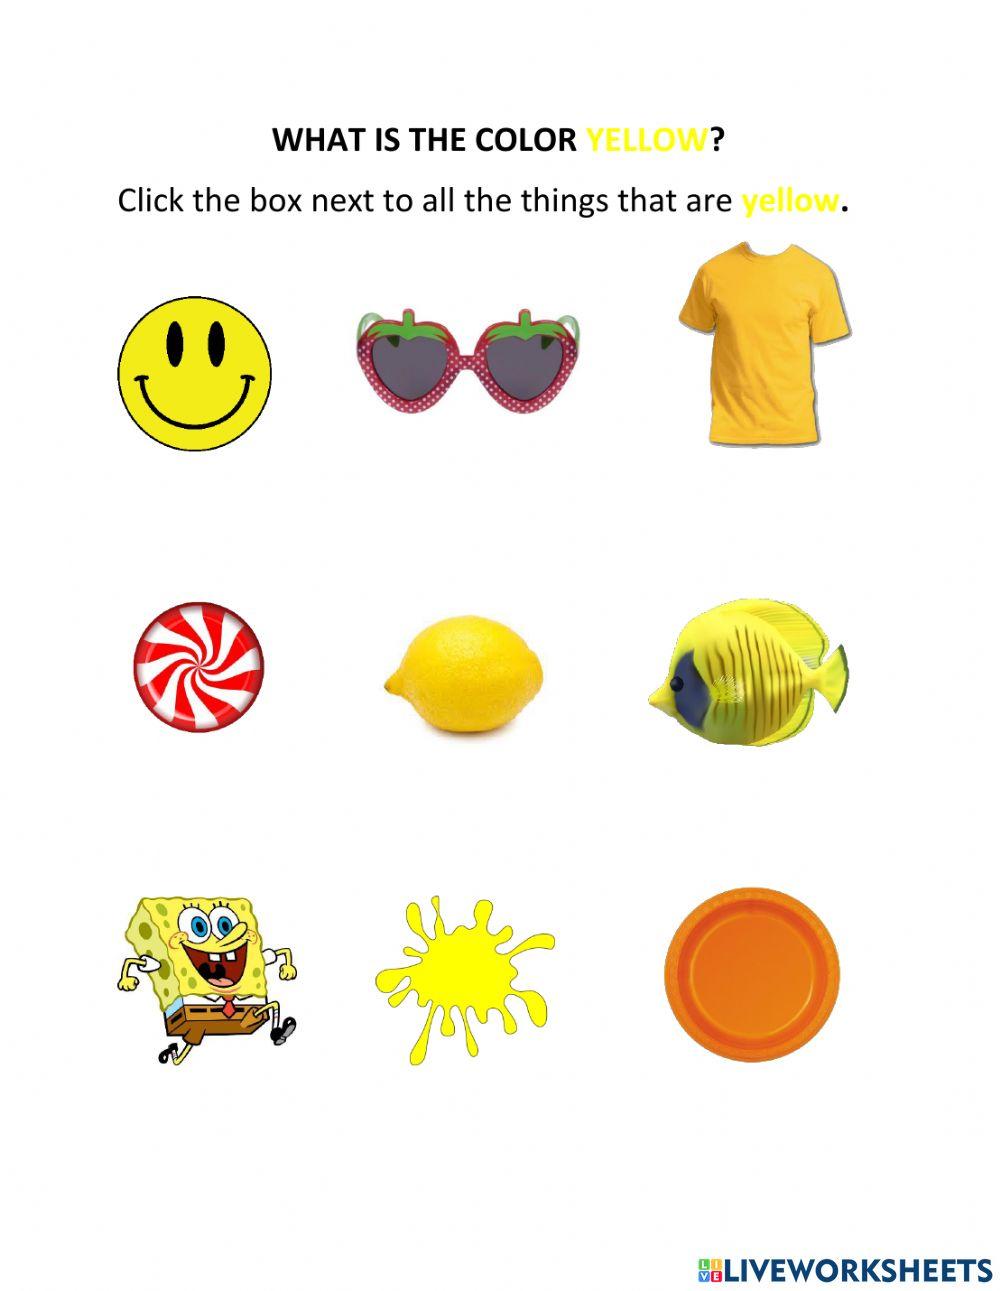 What is the Color Yellow?